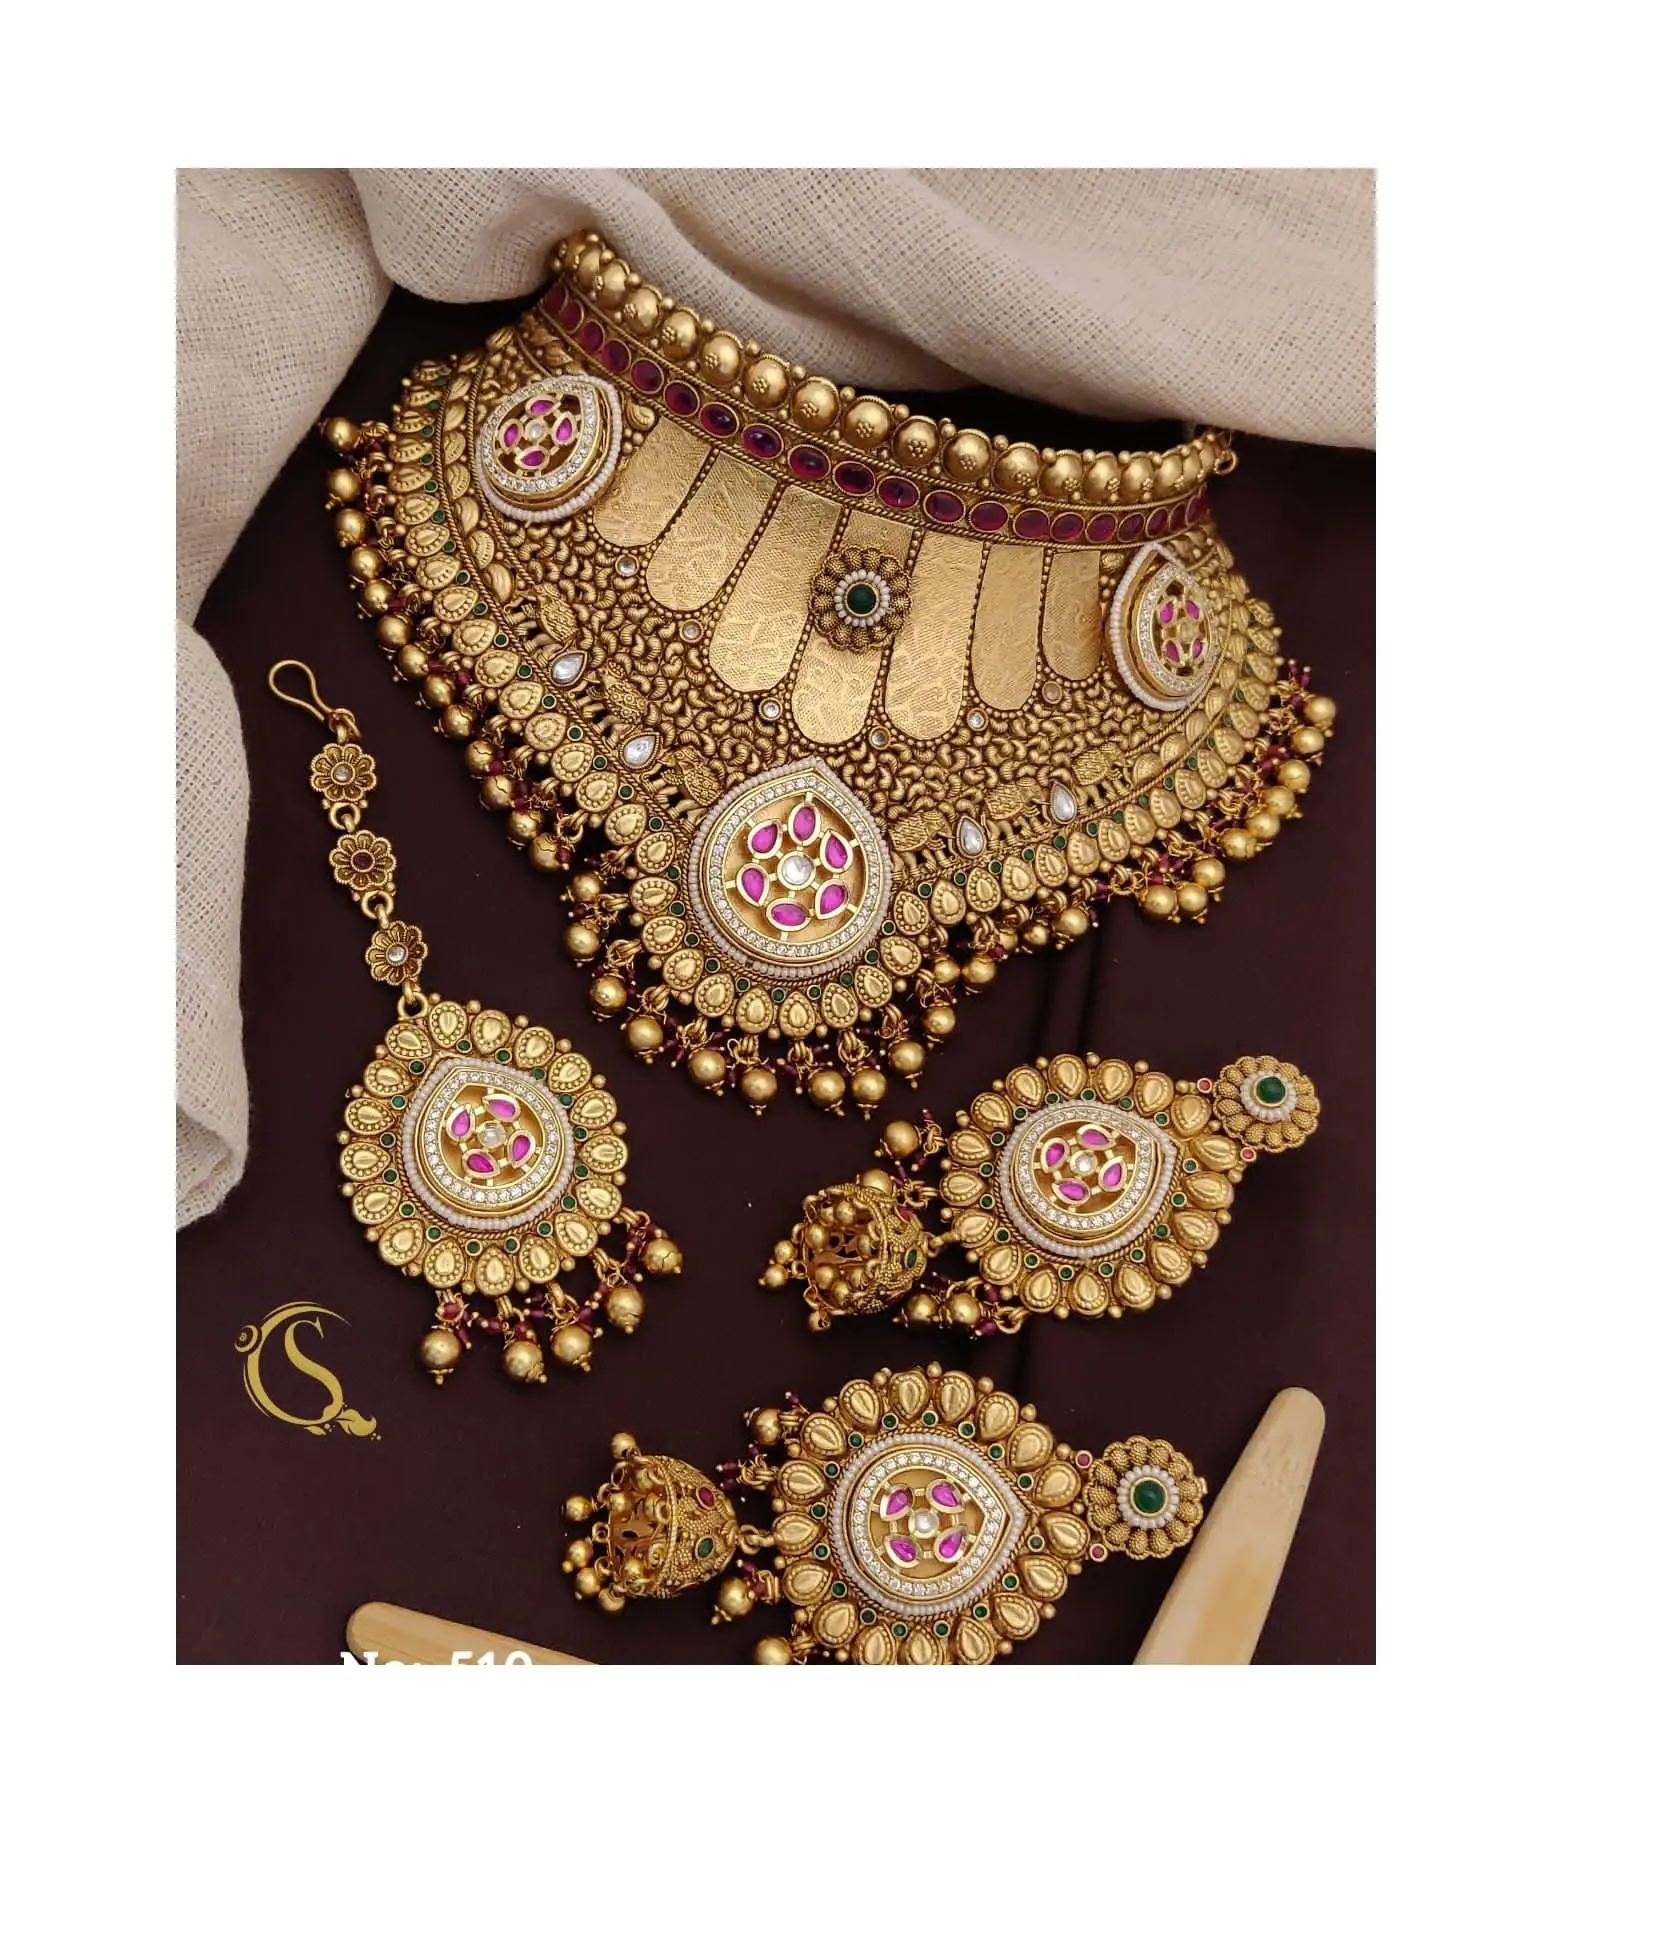 Top Quality Jewelry Necklaces for Womens Available at Wholesale Price from Indian Exporter and Manufacturer